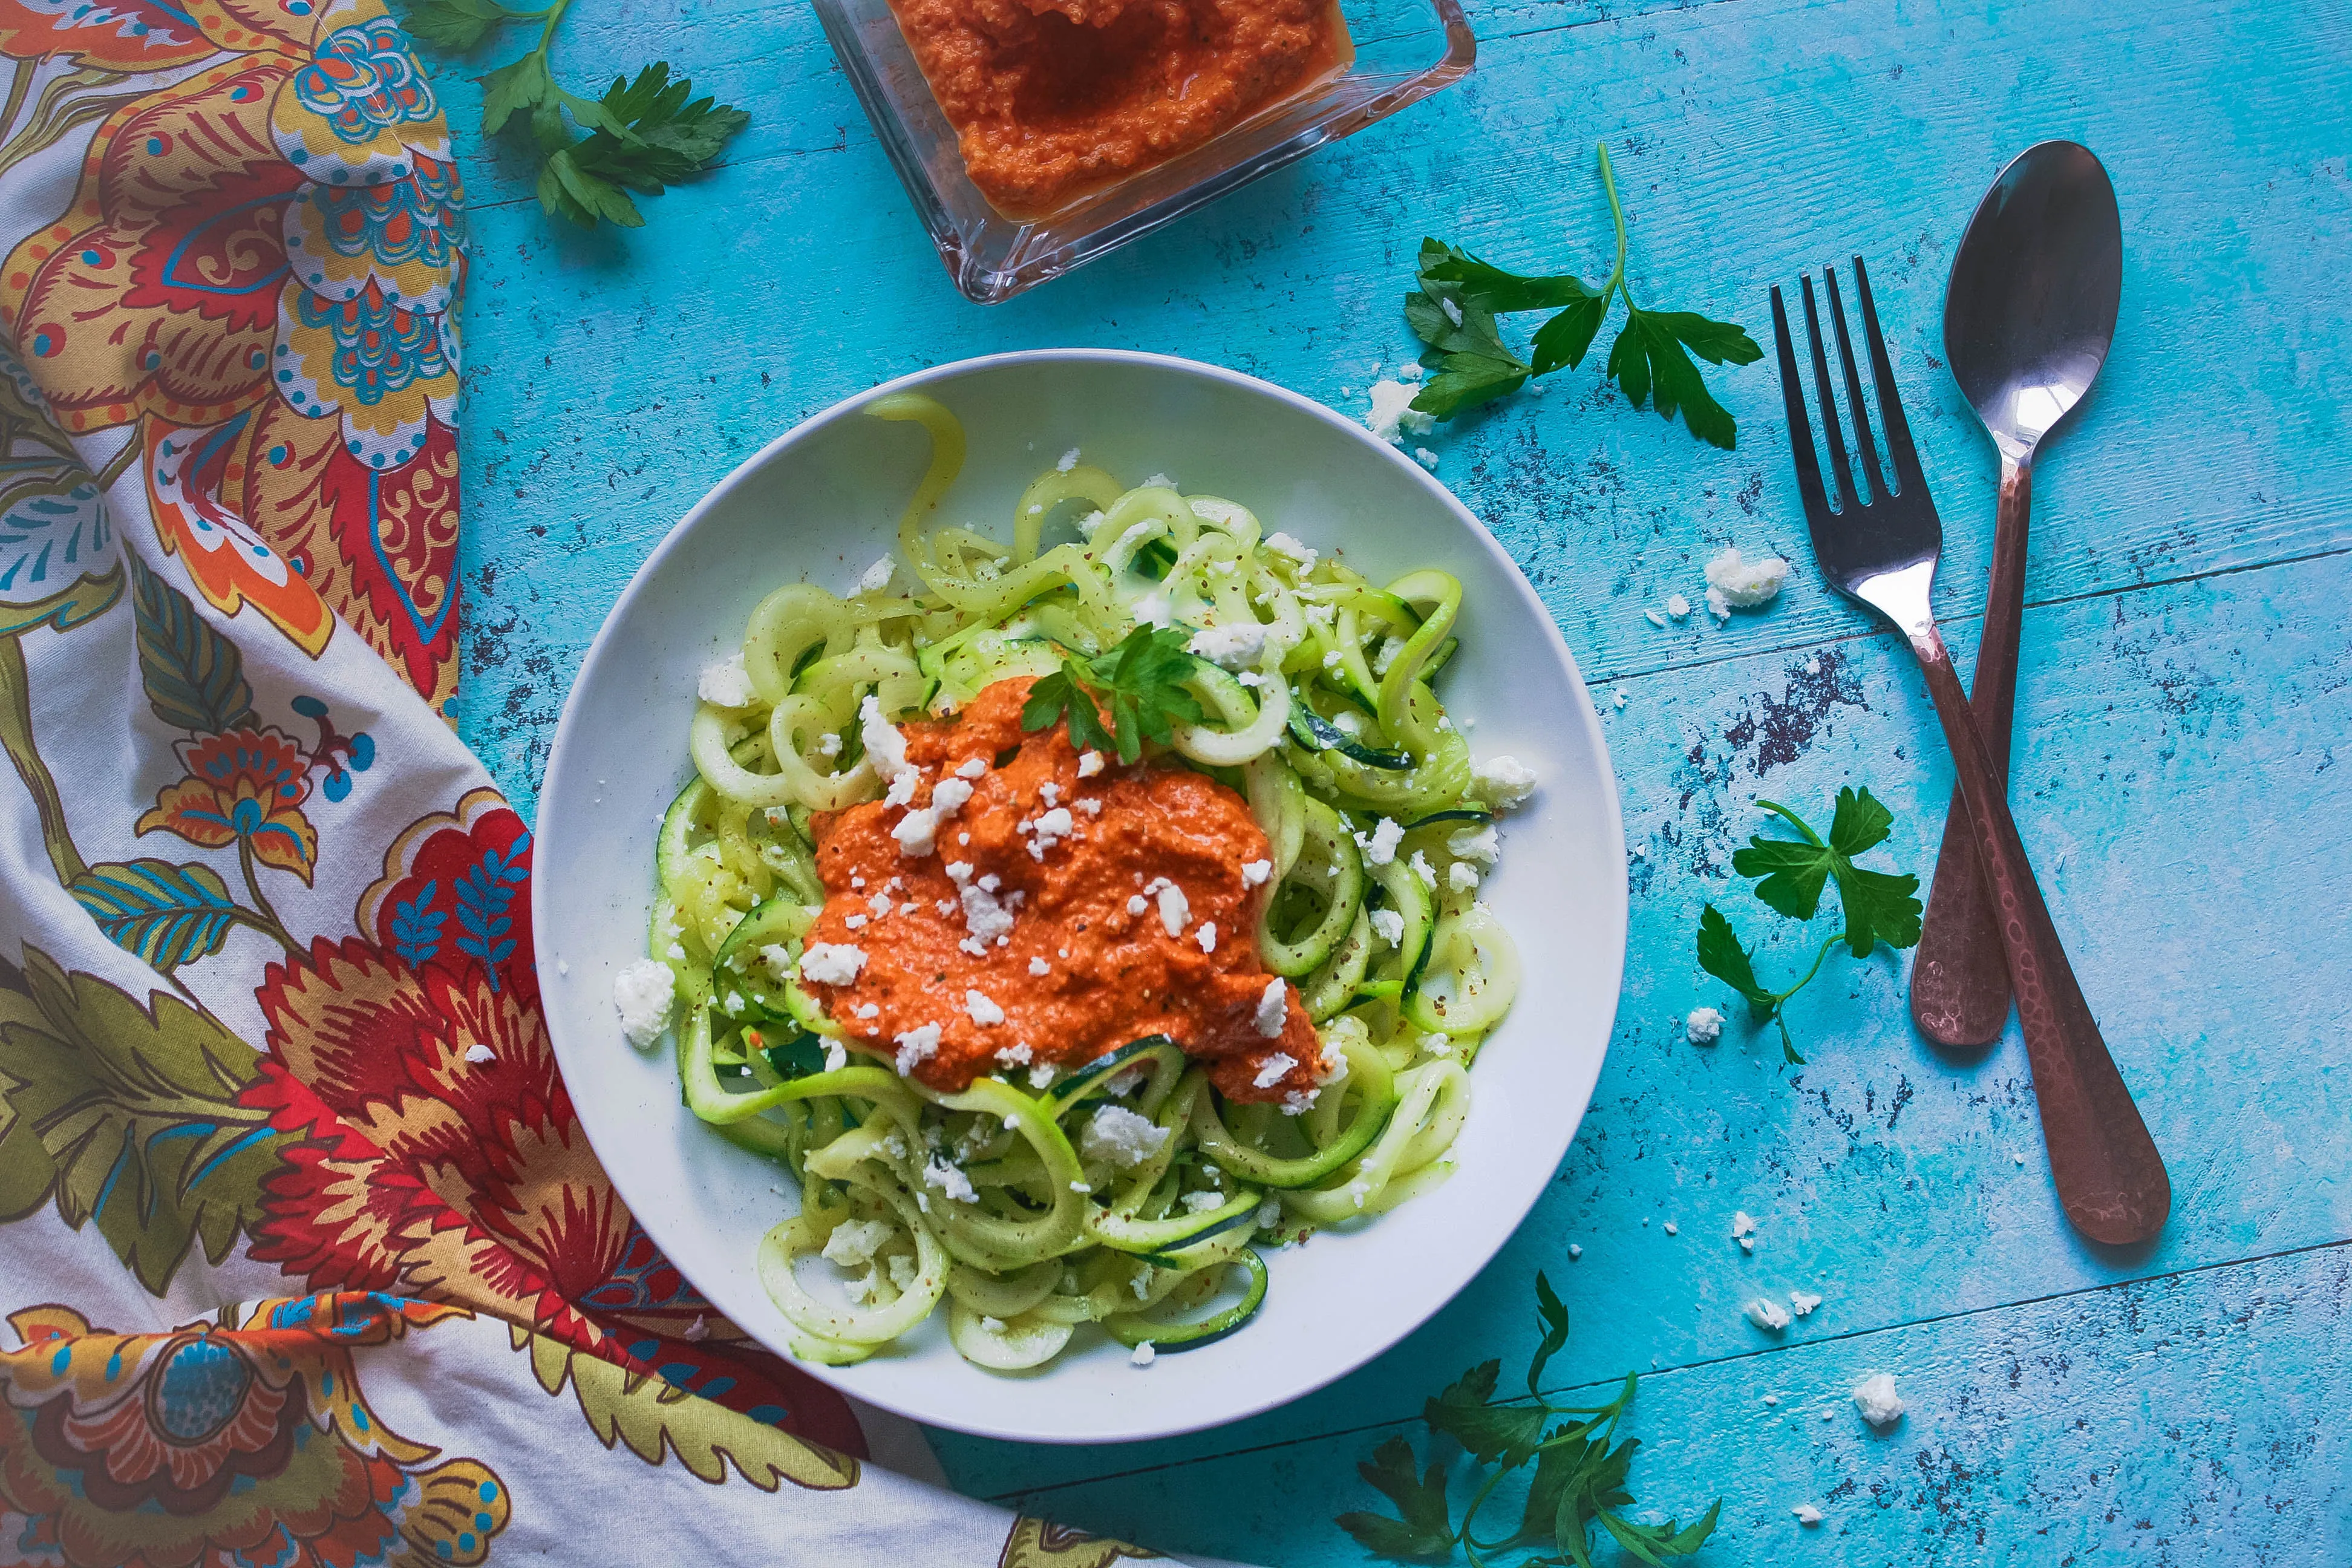 Low carb zoodles with Romesco sauce is a healthy meal you should make soon. Low carb zoodles with Romesco sauce is a delight, and it's so easy to make, too.